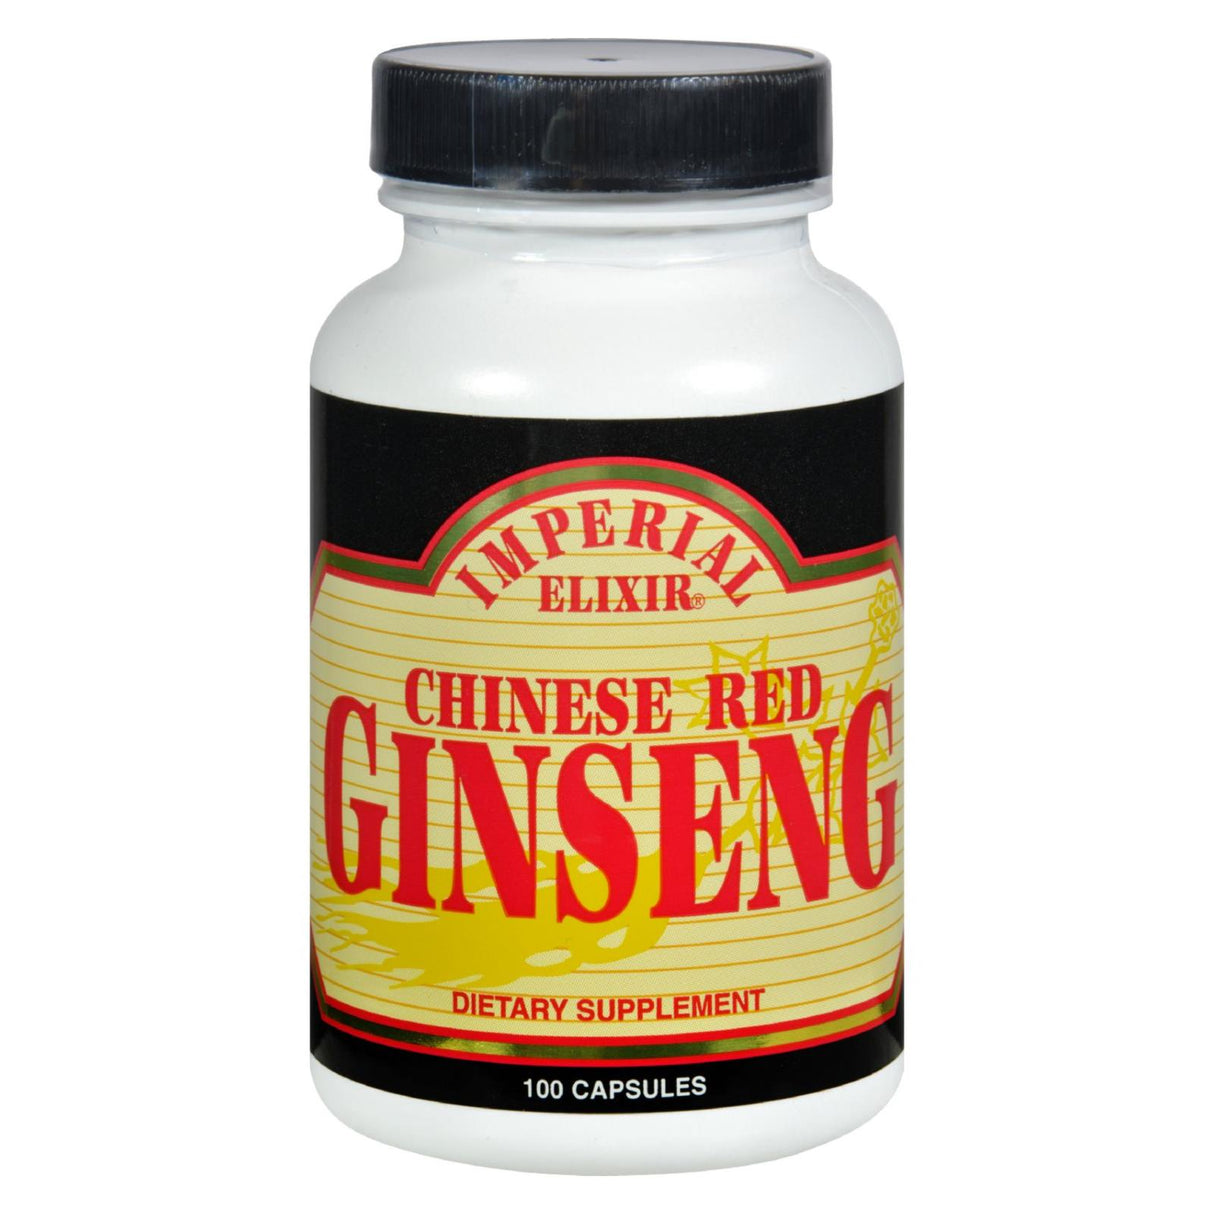 Imperial Elixir Chinese Red Ginseng, 100 Capsules - Cozy Farm 